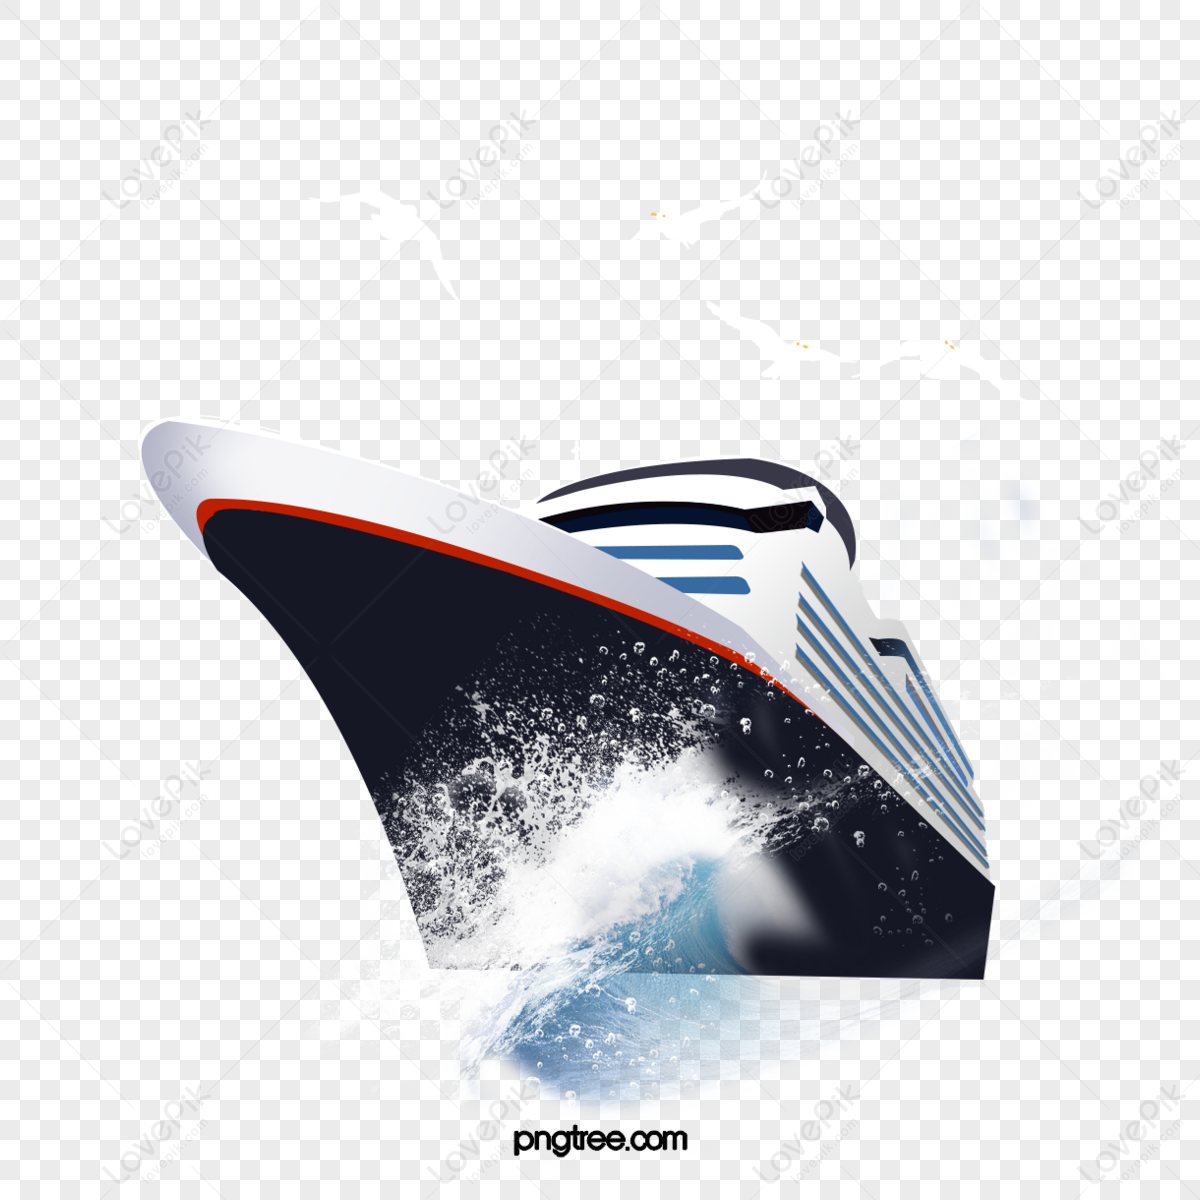 cruise ship,steamship,service,ferry service png image